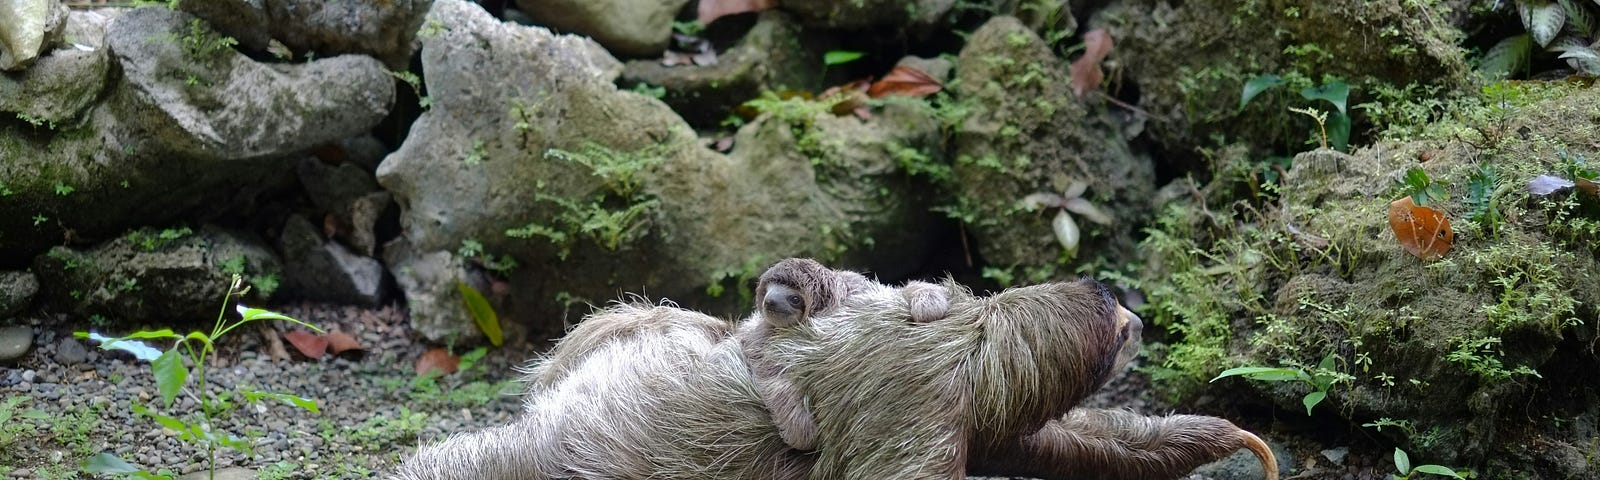 Mama sloth with baby on her back